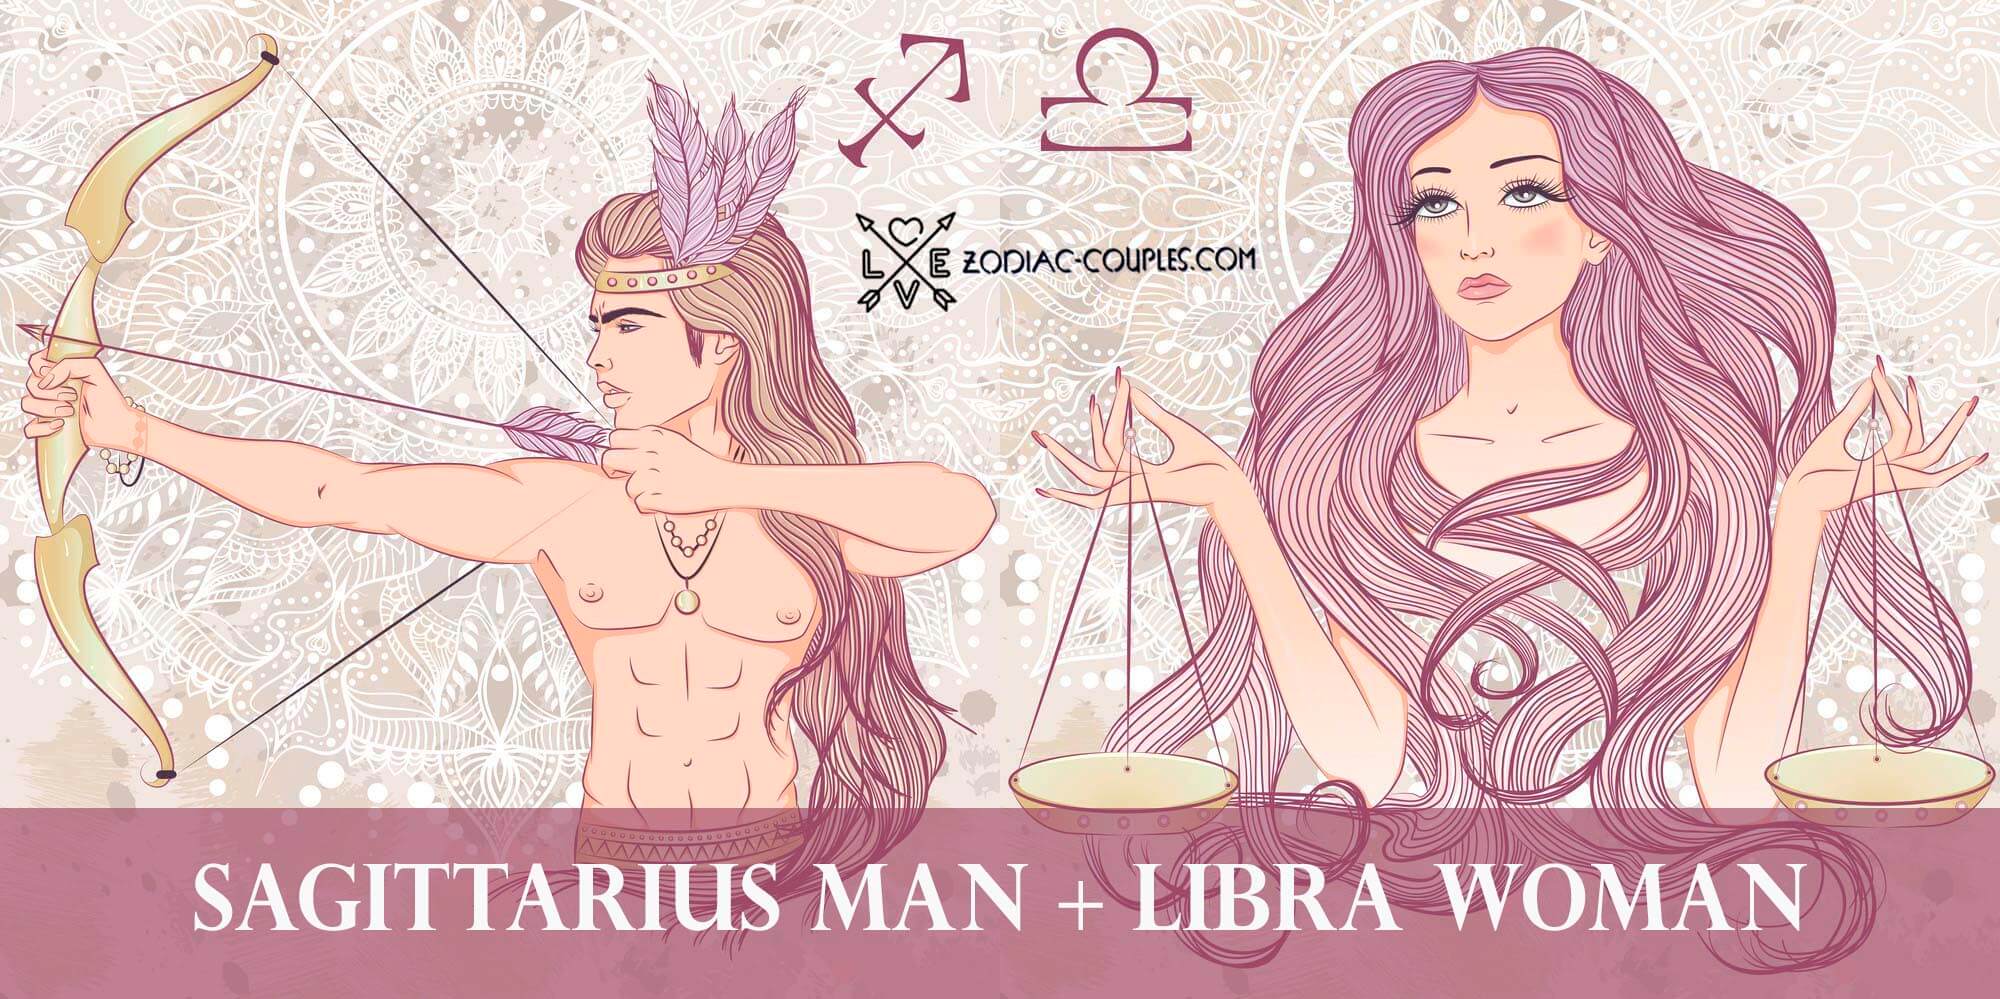 Why are taurus and libra karmically linked?